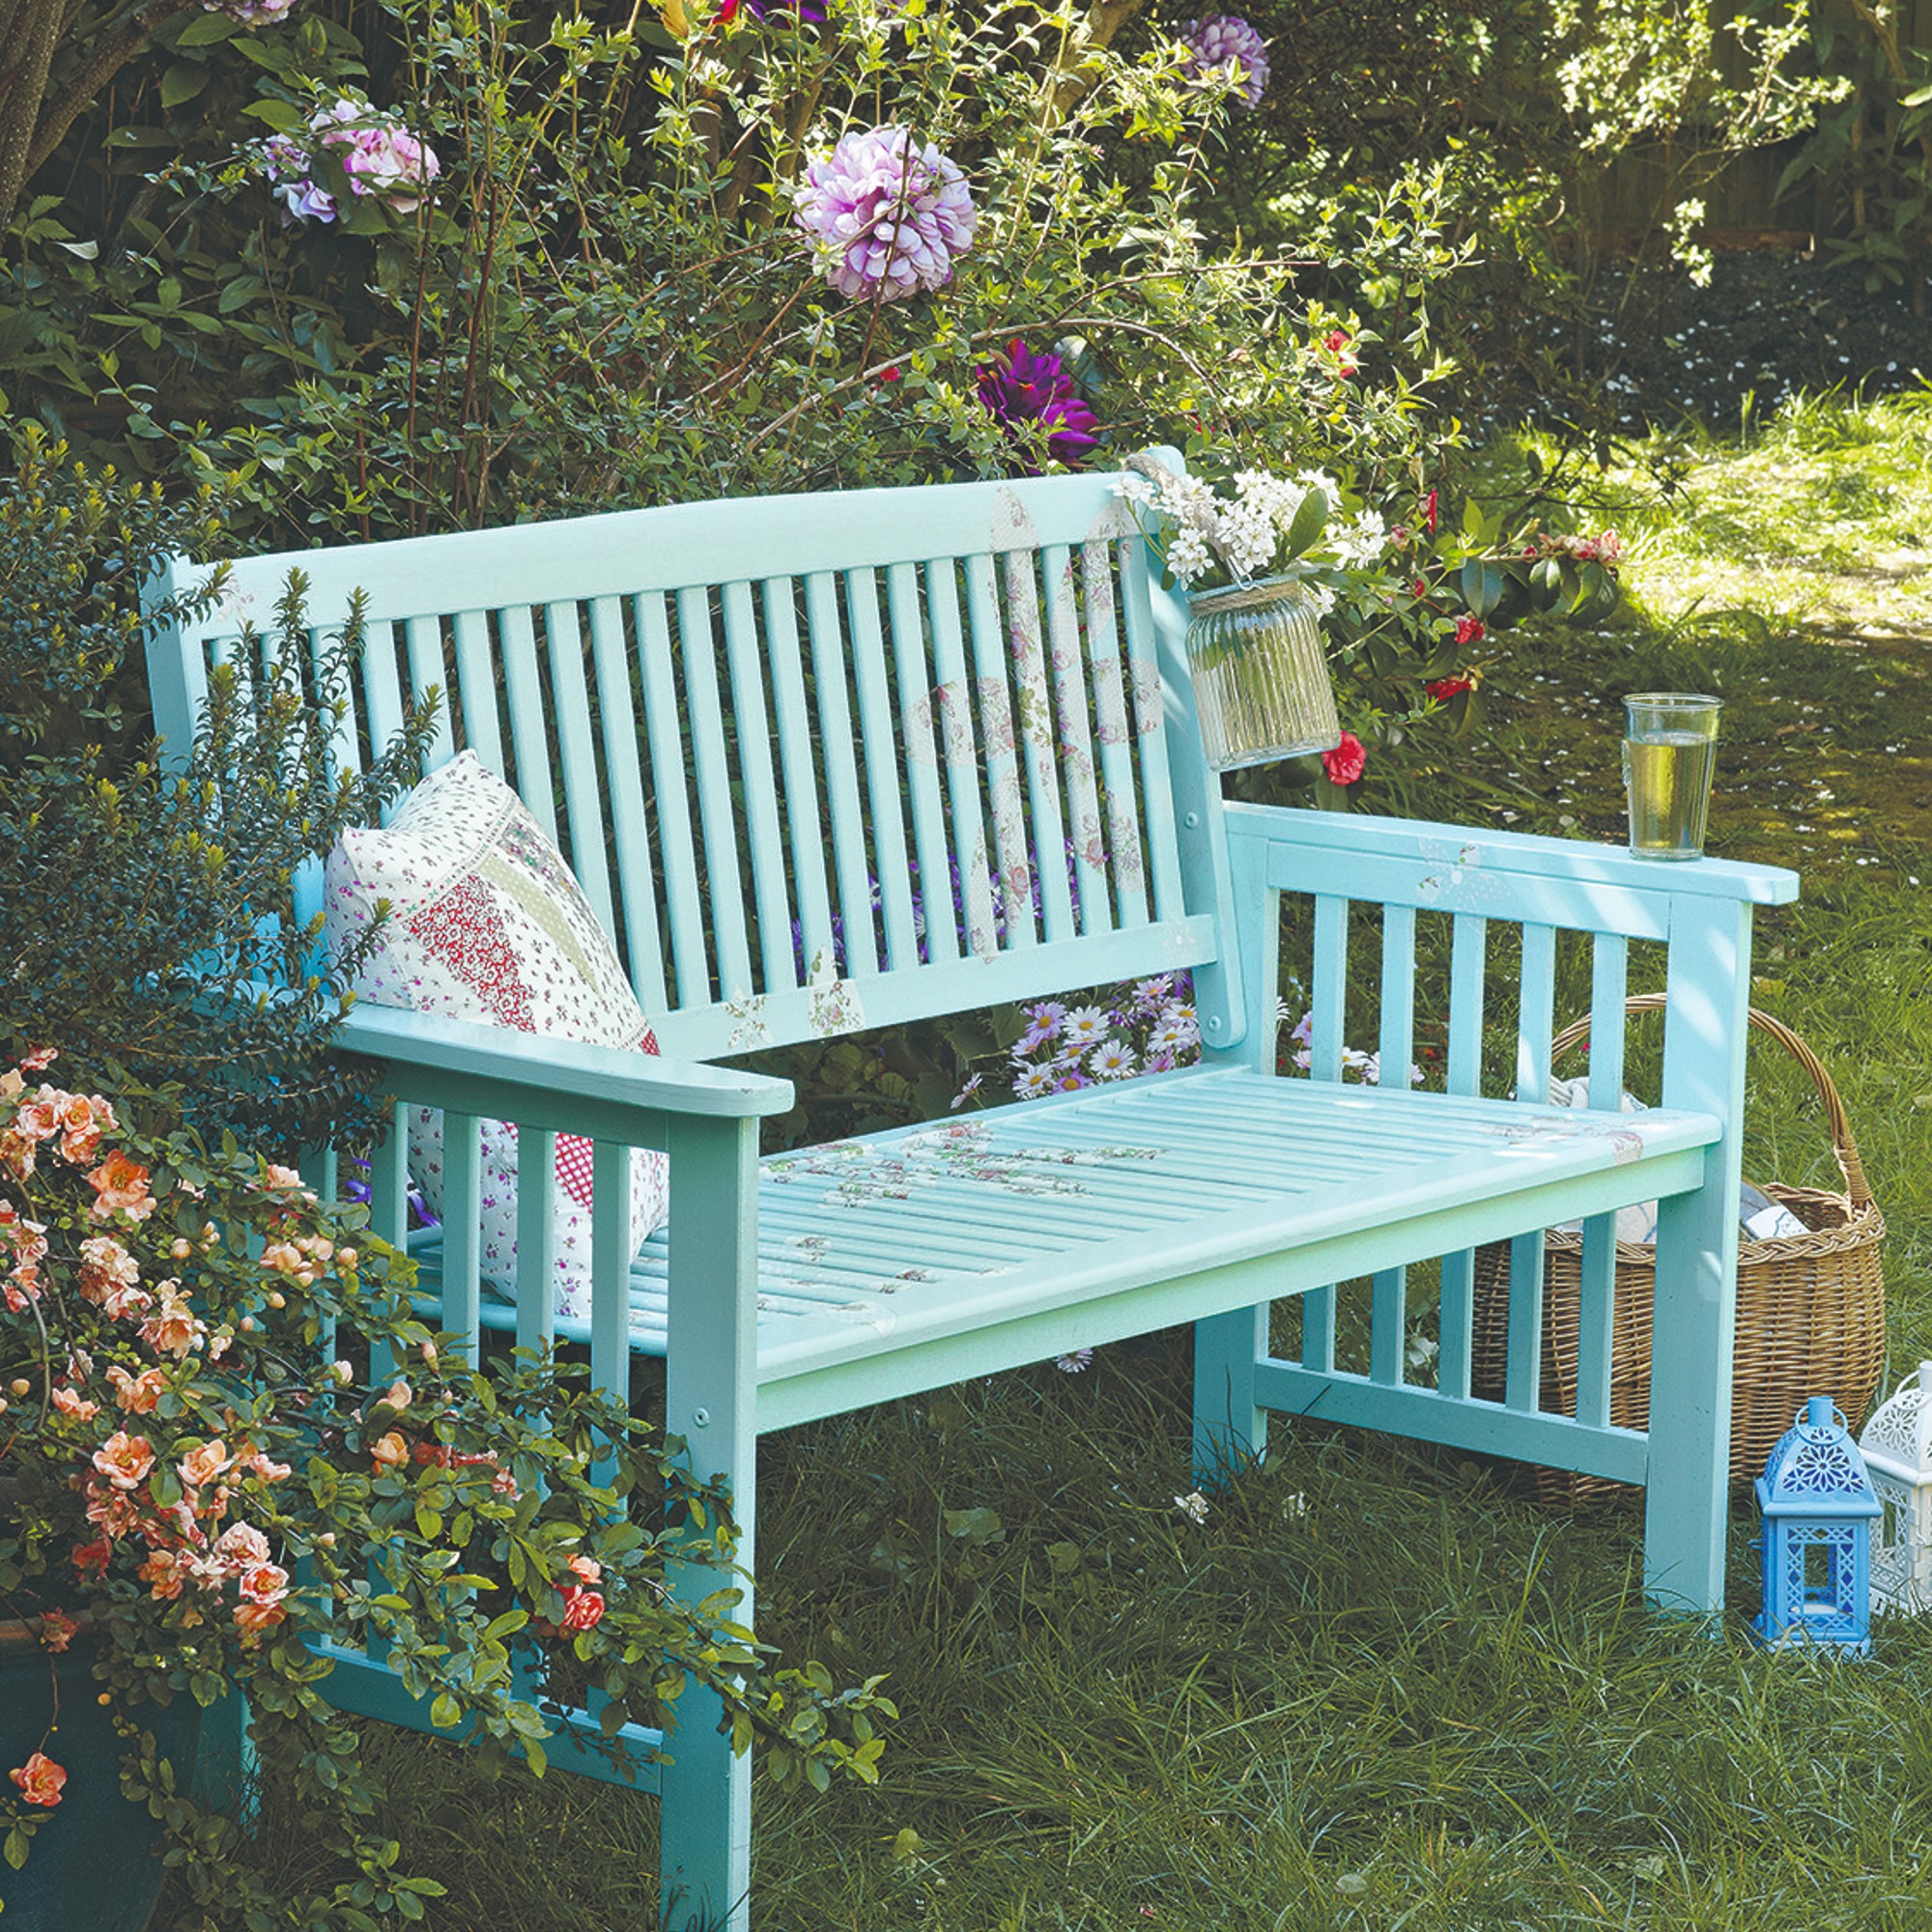 A turquoise-painted garden bench surrounded by flowering plants